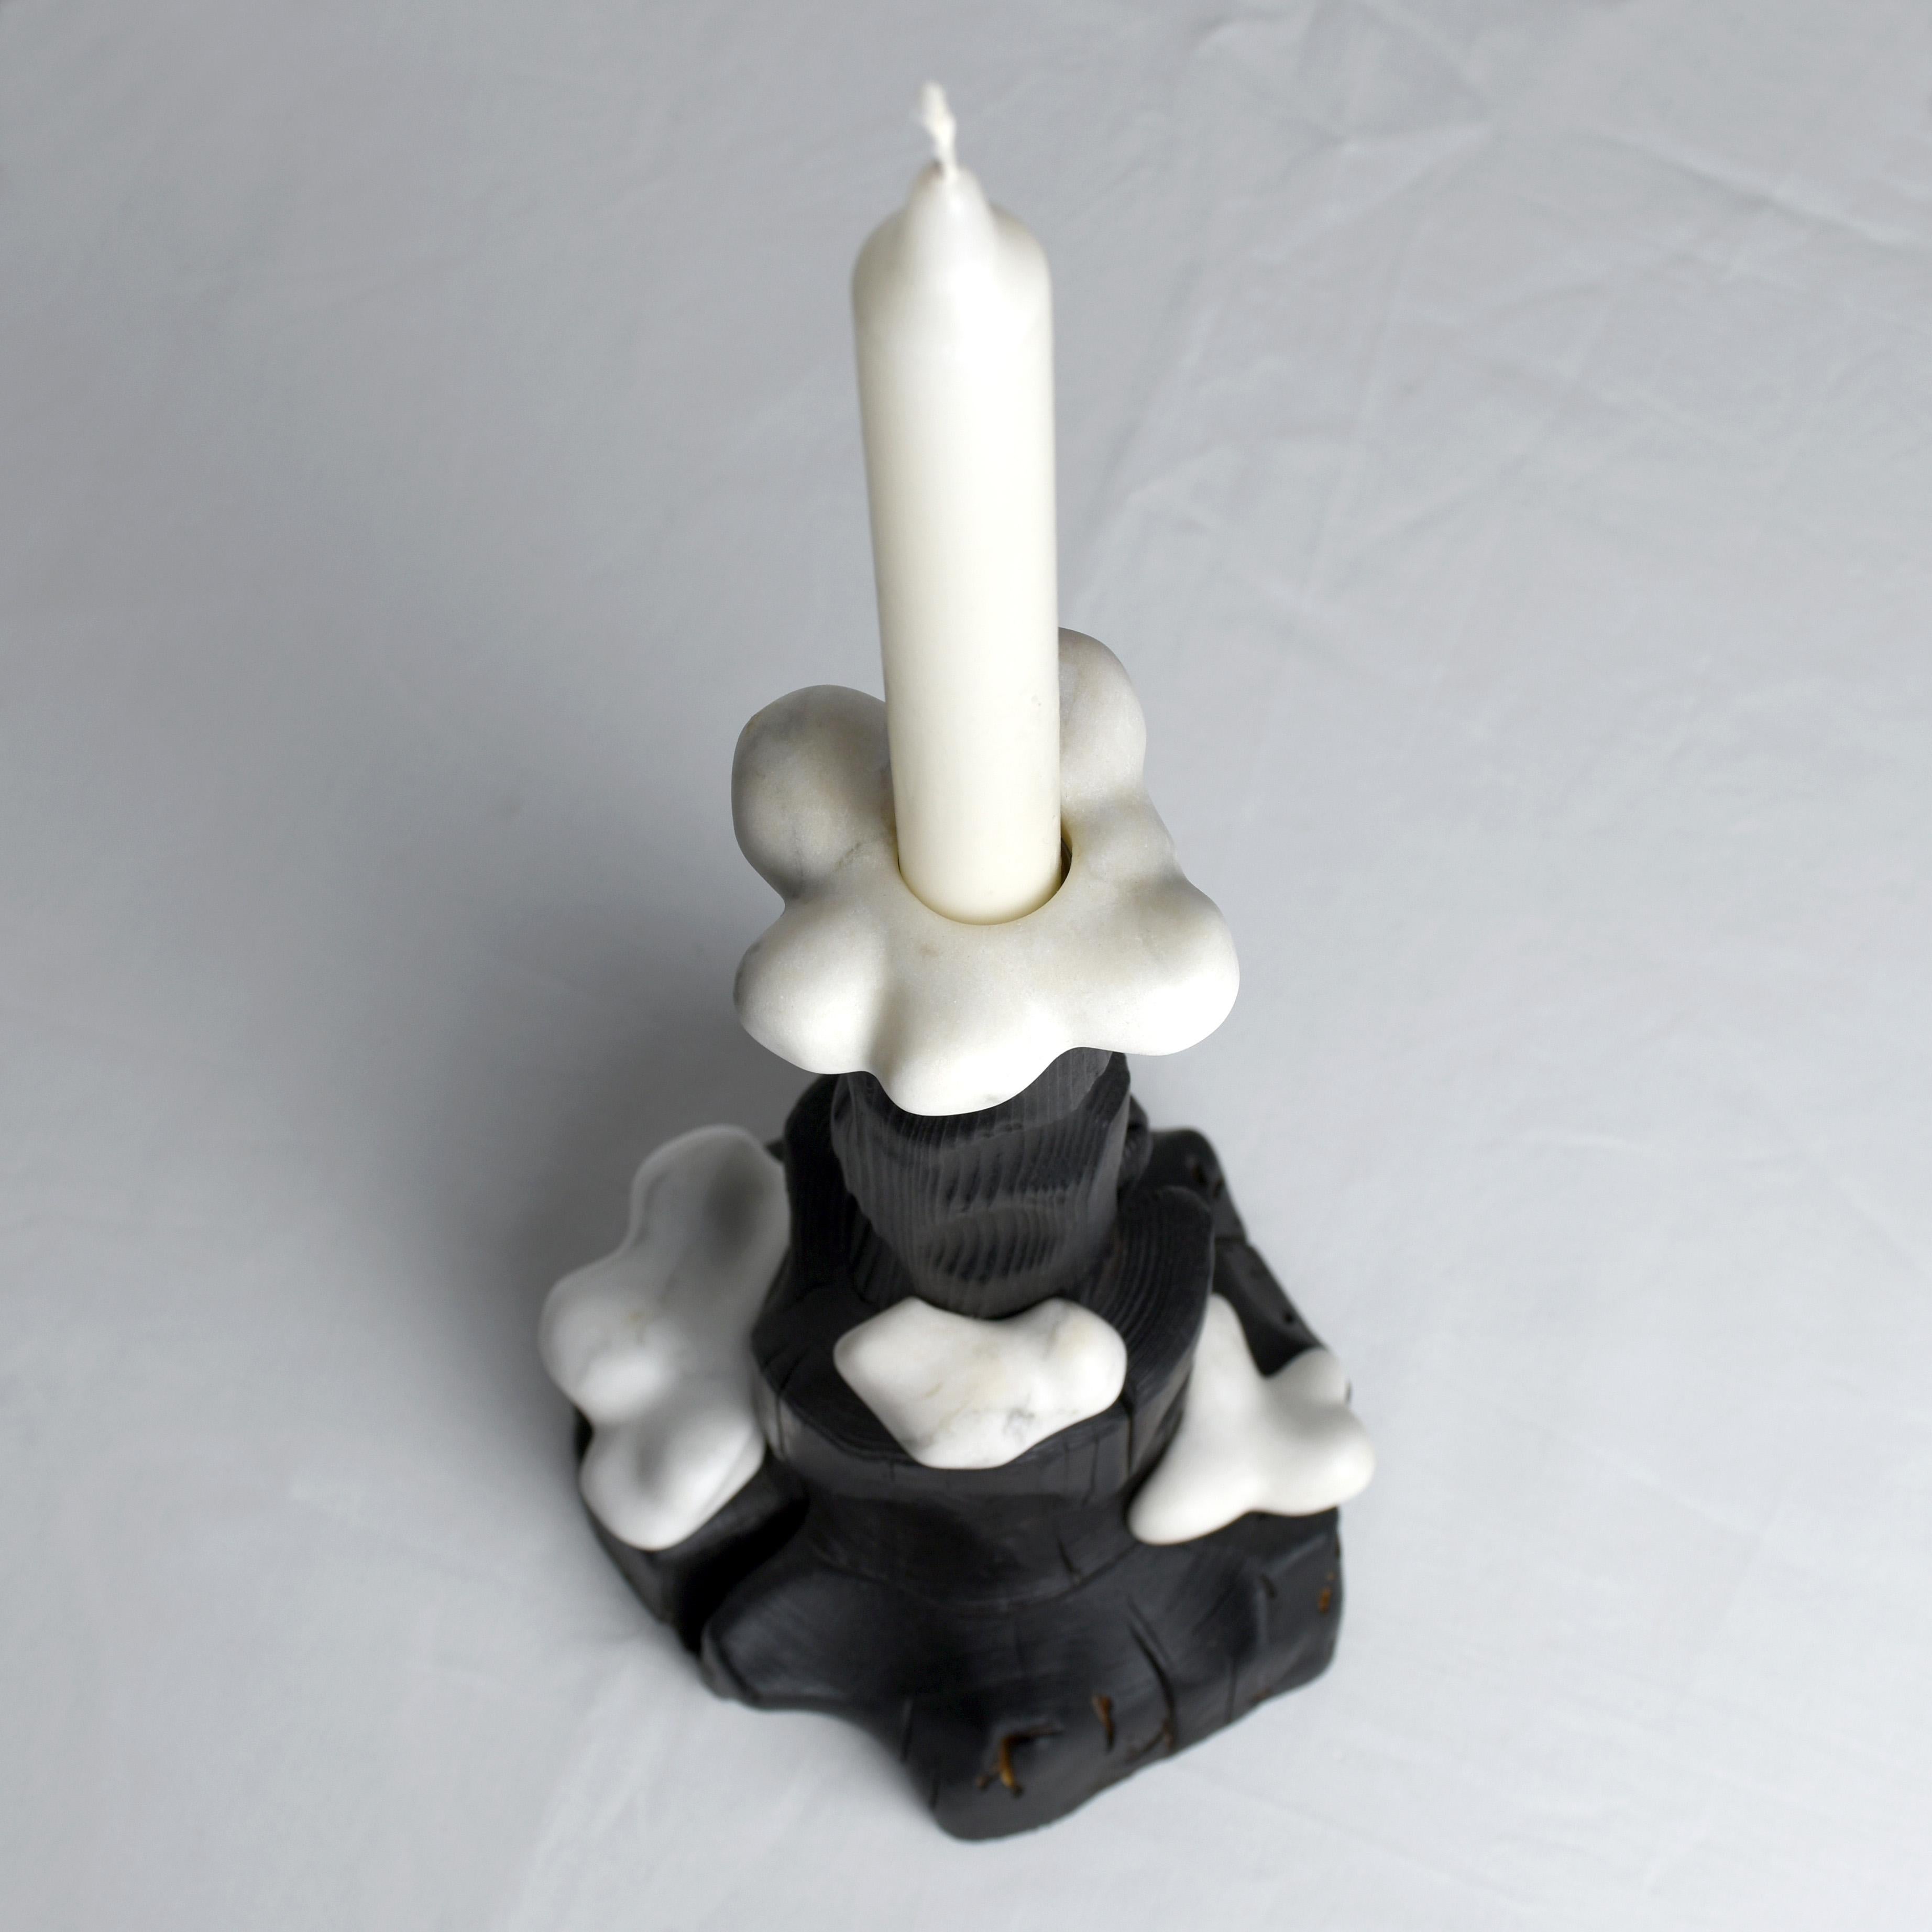 Cumulus, Sculptured Candle Holder from Reclaimed Burned Wood and White Marble For Sale 2